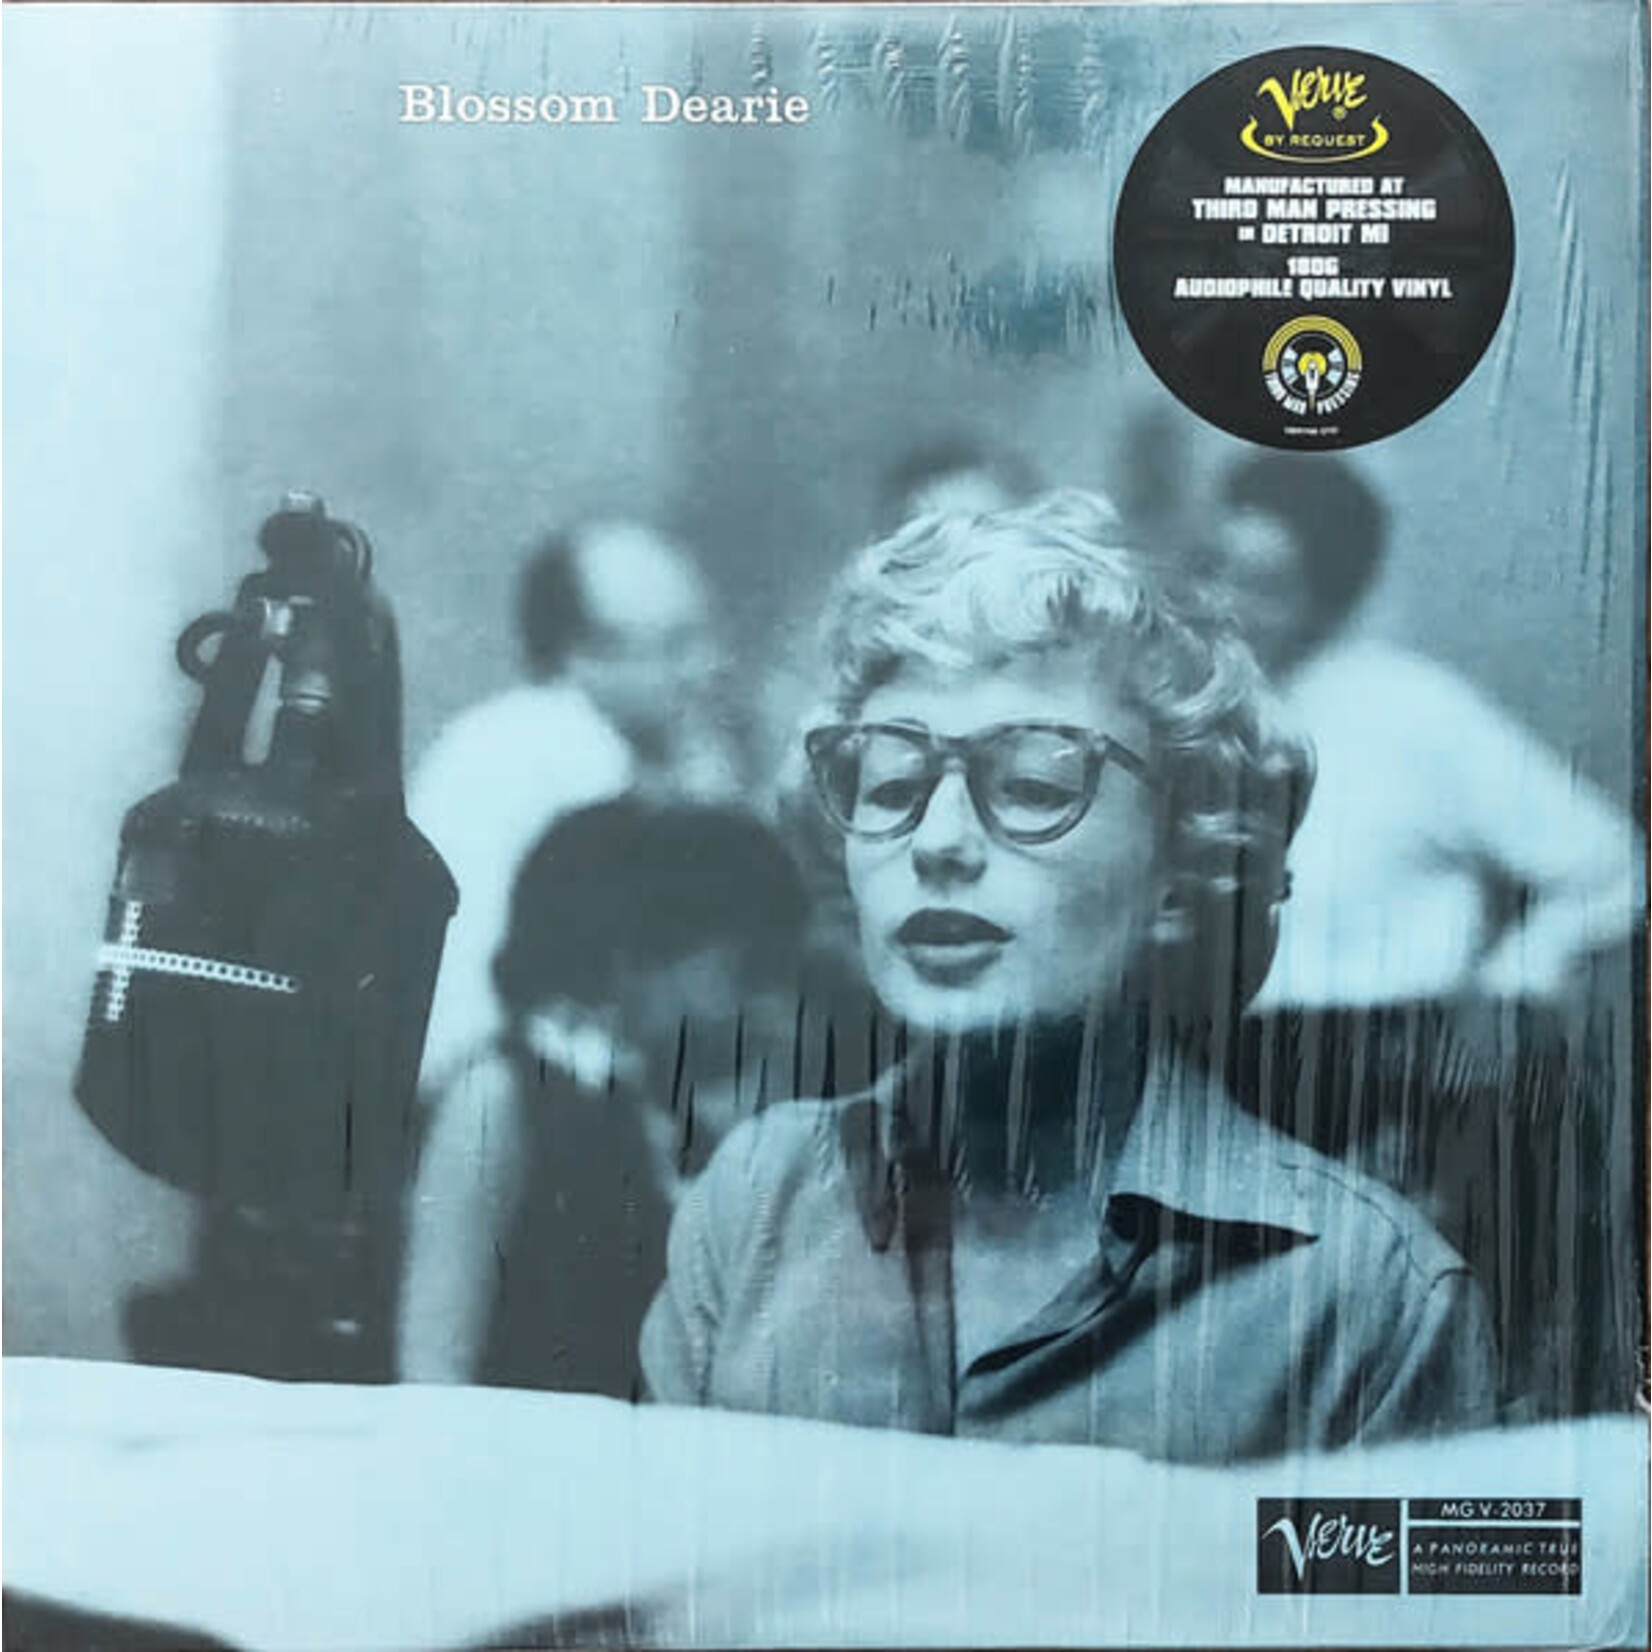 [New] Blossom Dearie - Blossom Dearie (Verve By Request series)